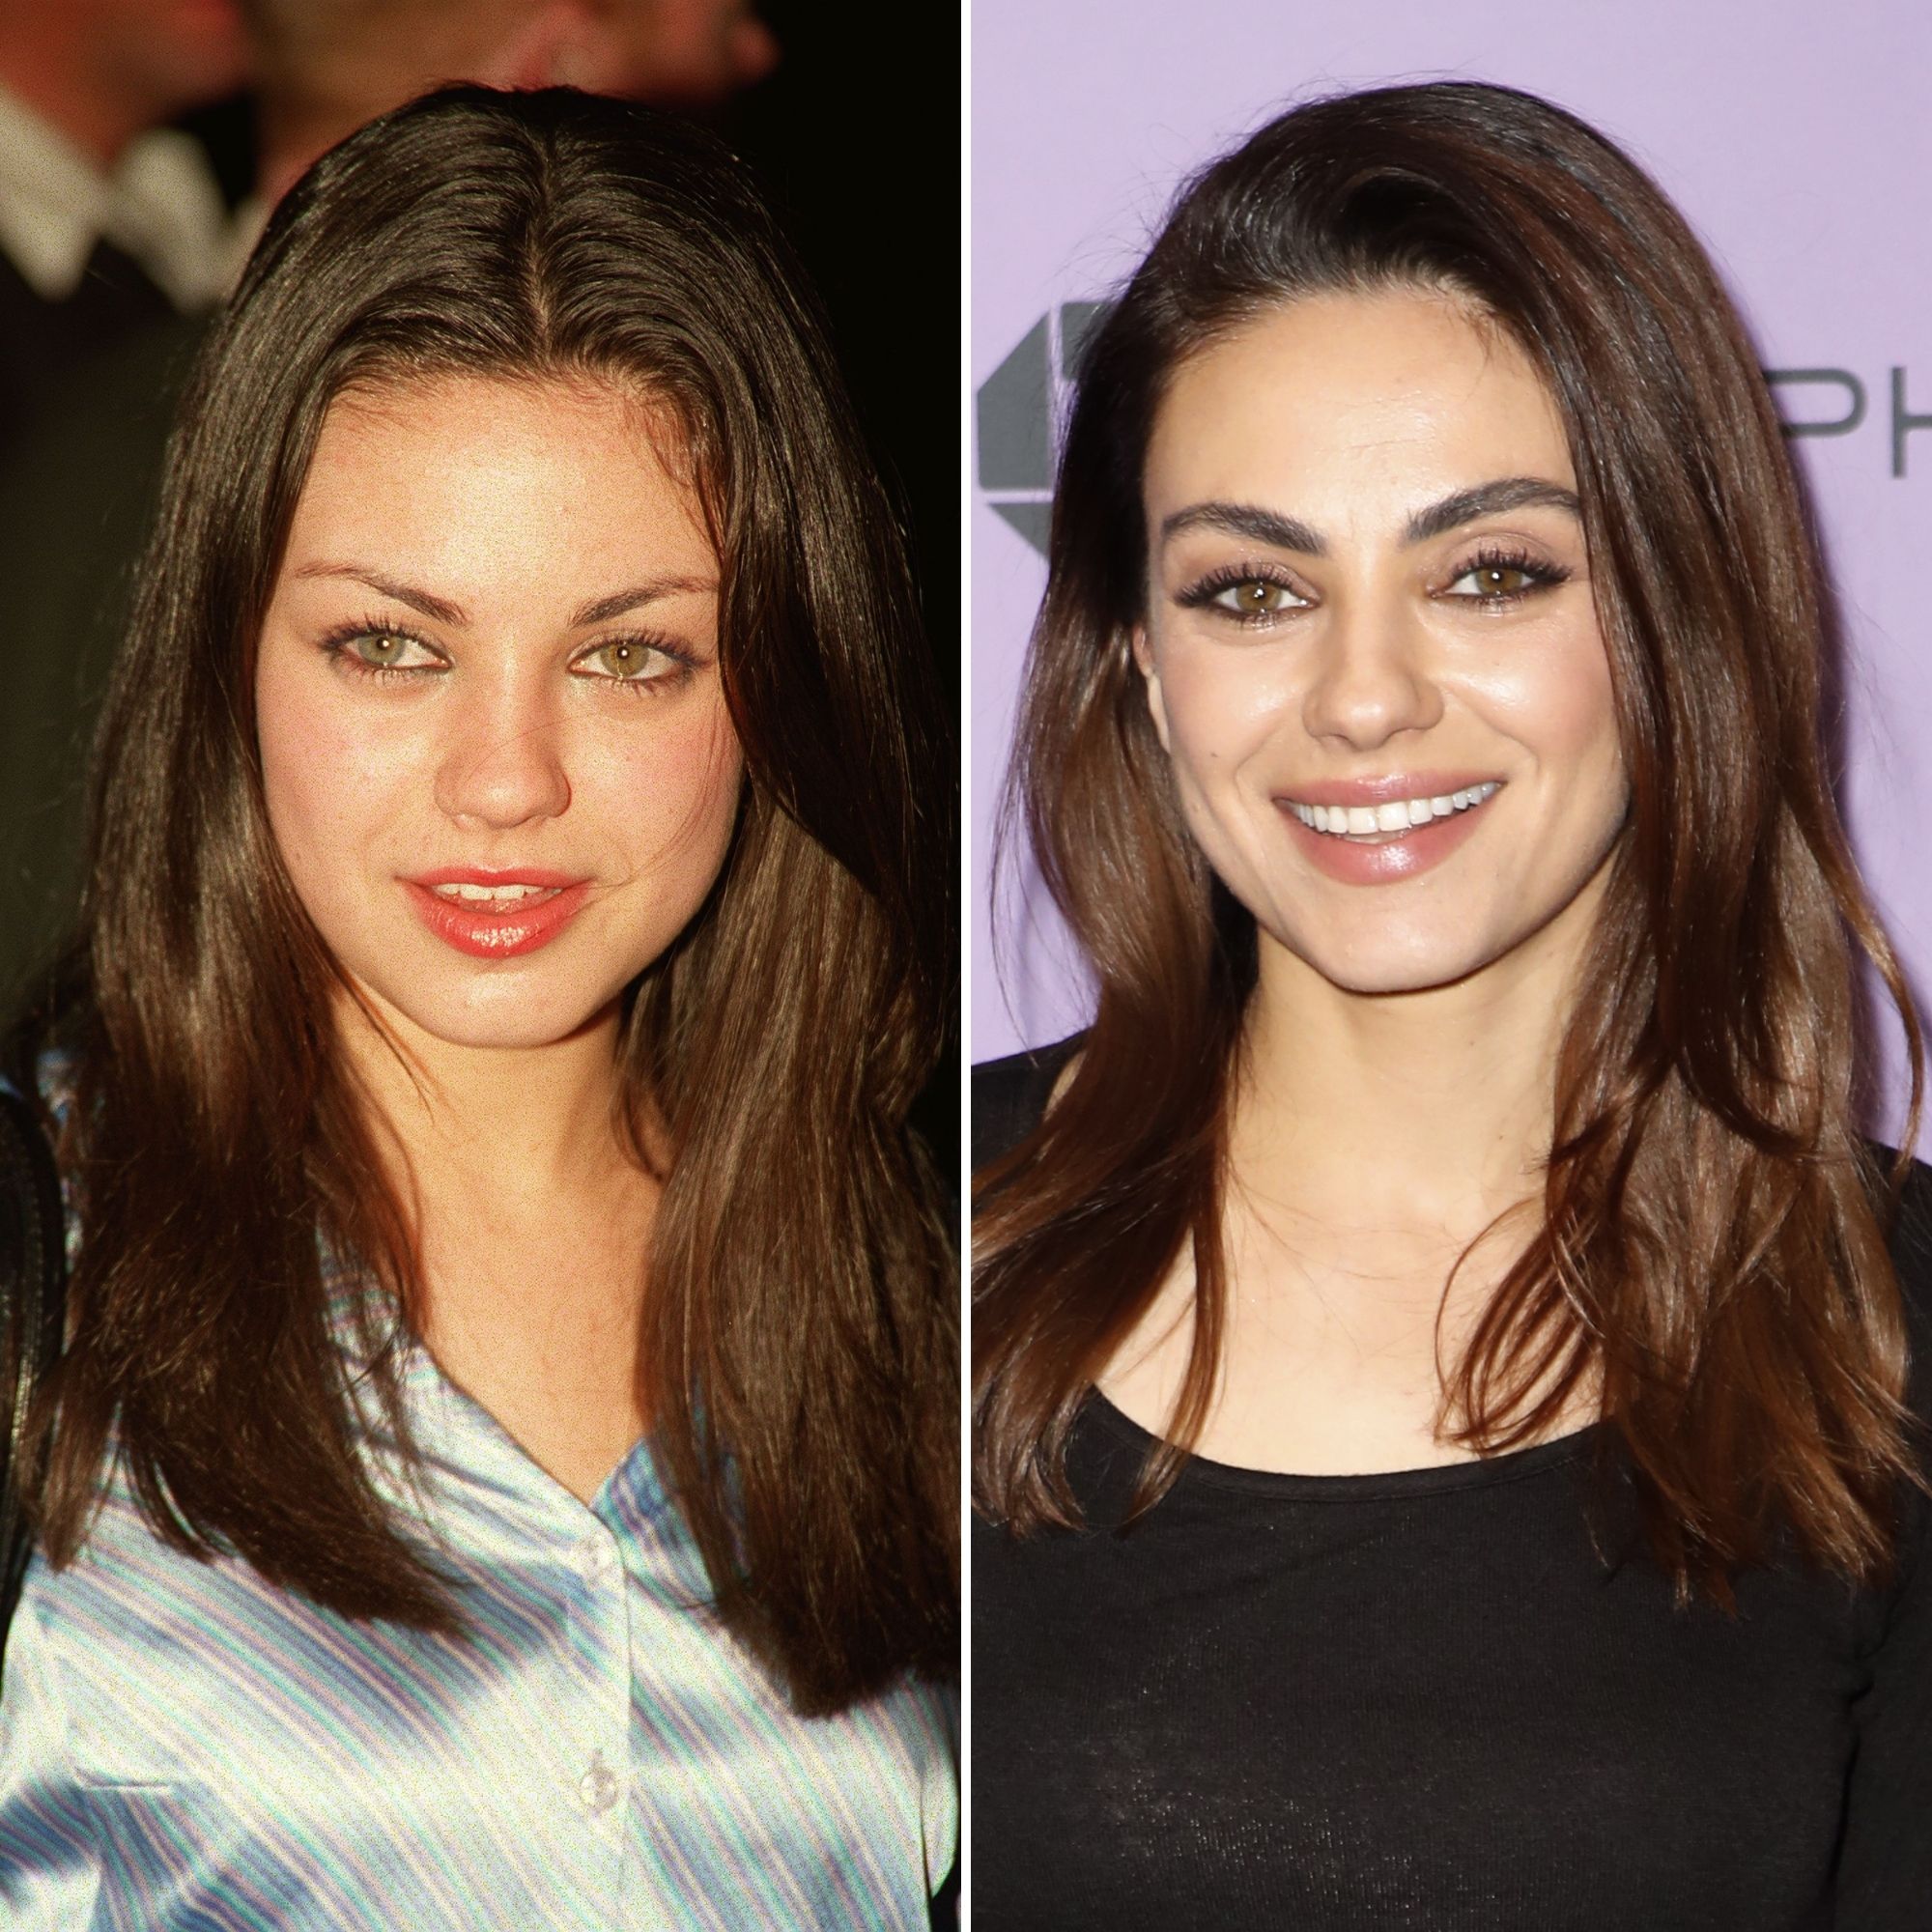 Mila Kunis Porn Galleries - Did Mila Kunis Get Plastic Surgery? Then and Now Photos